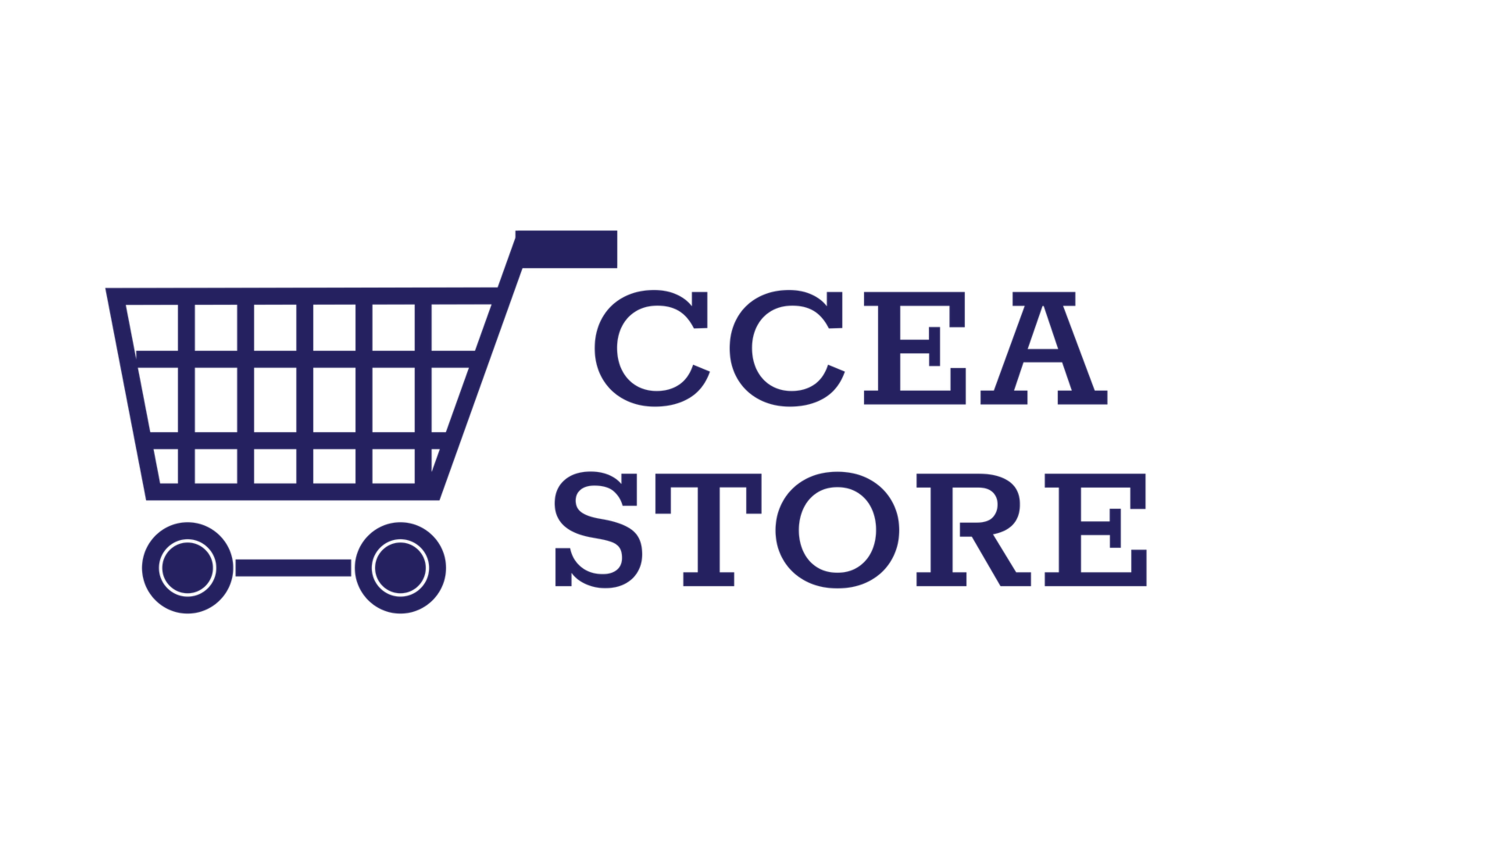 Back to the CCEA Store